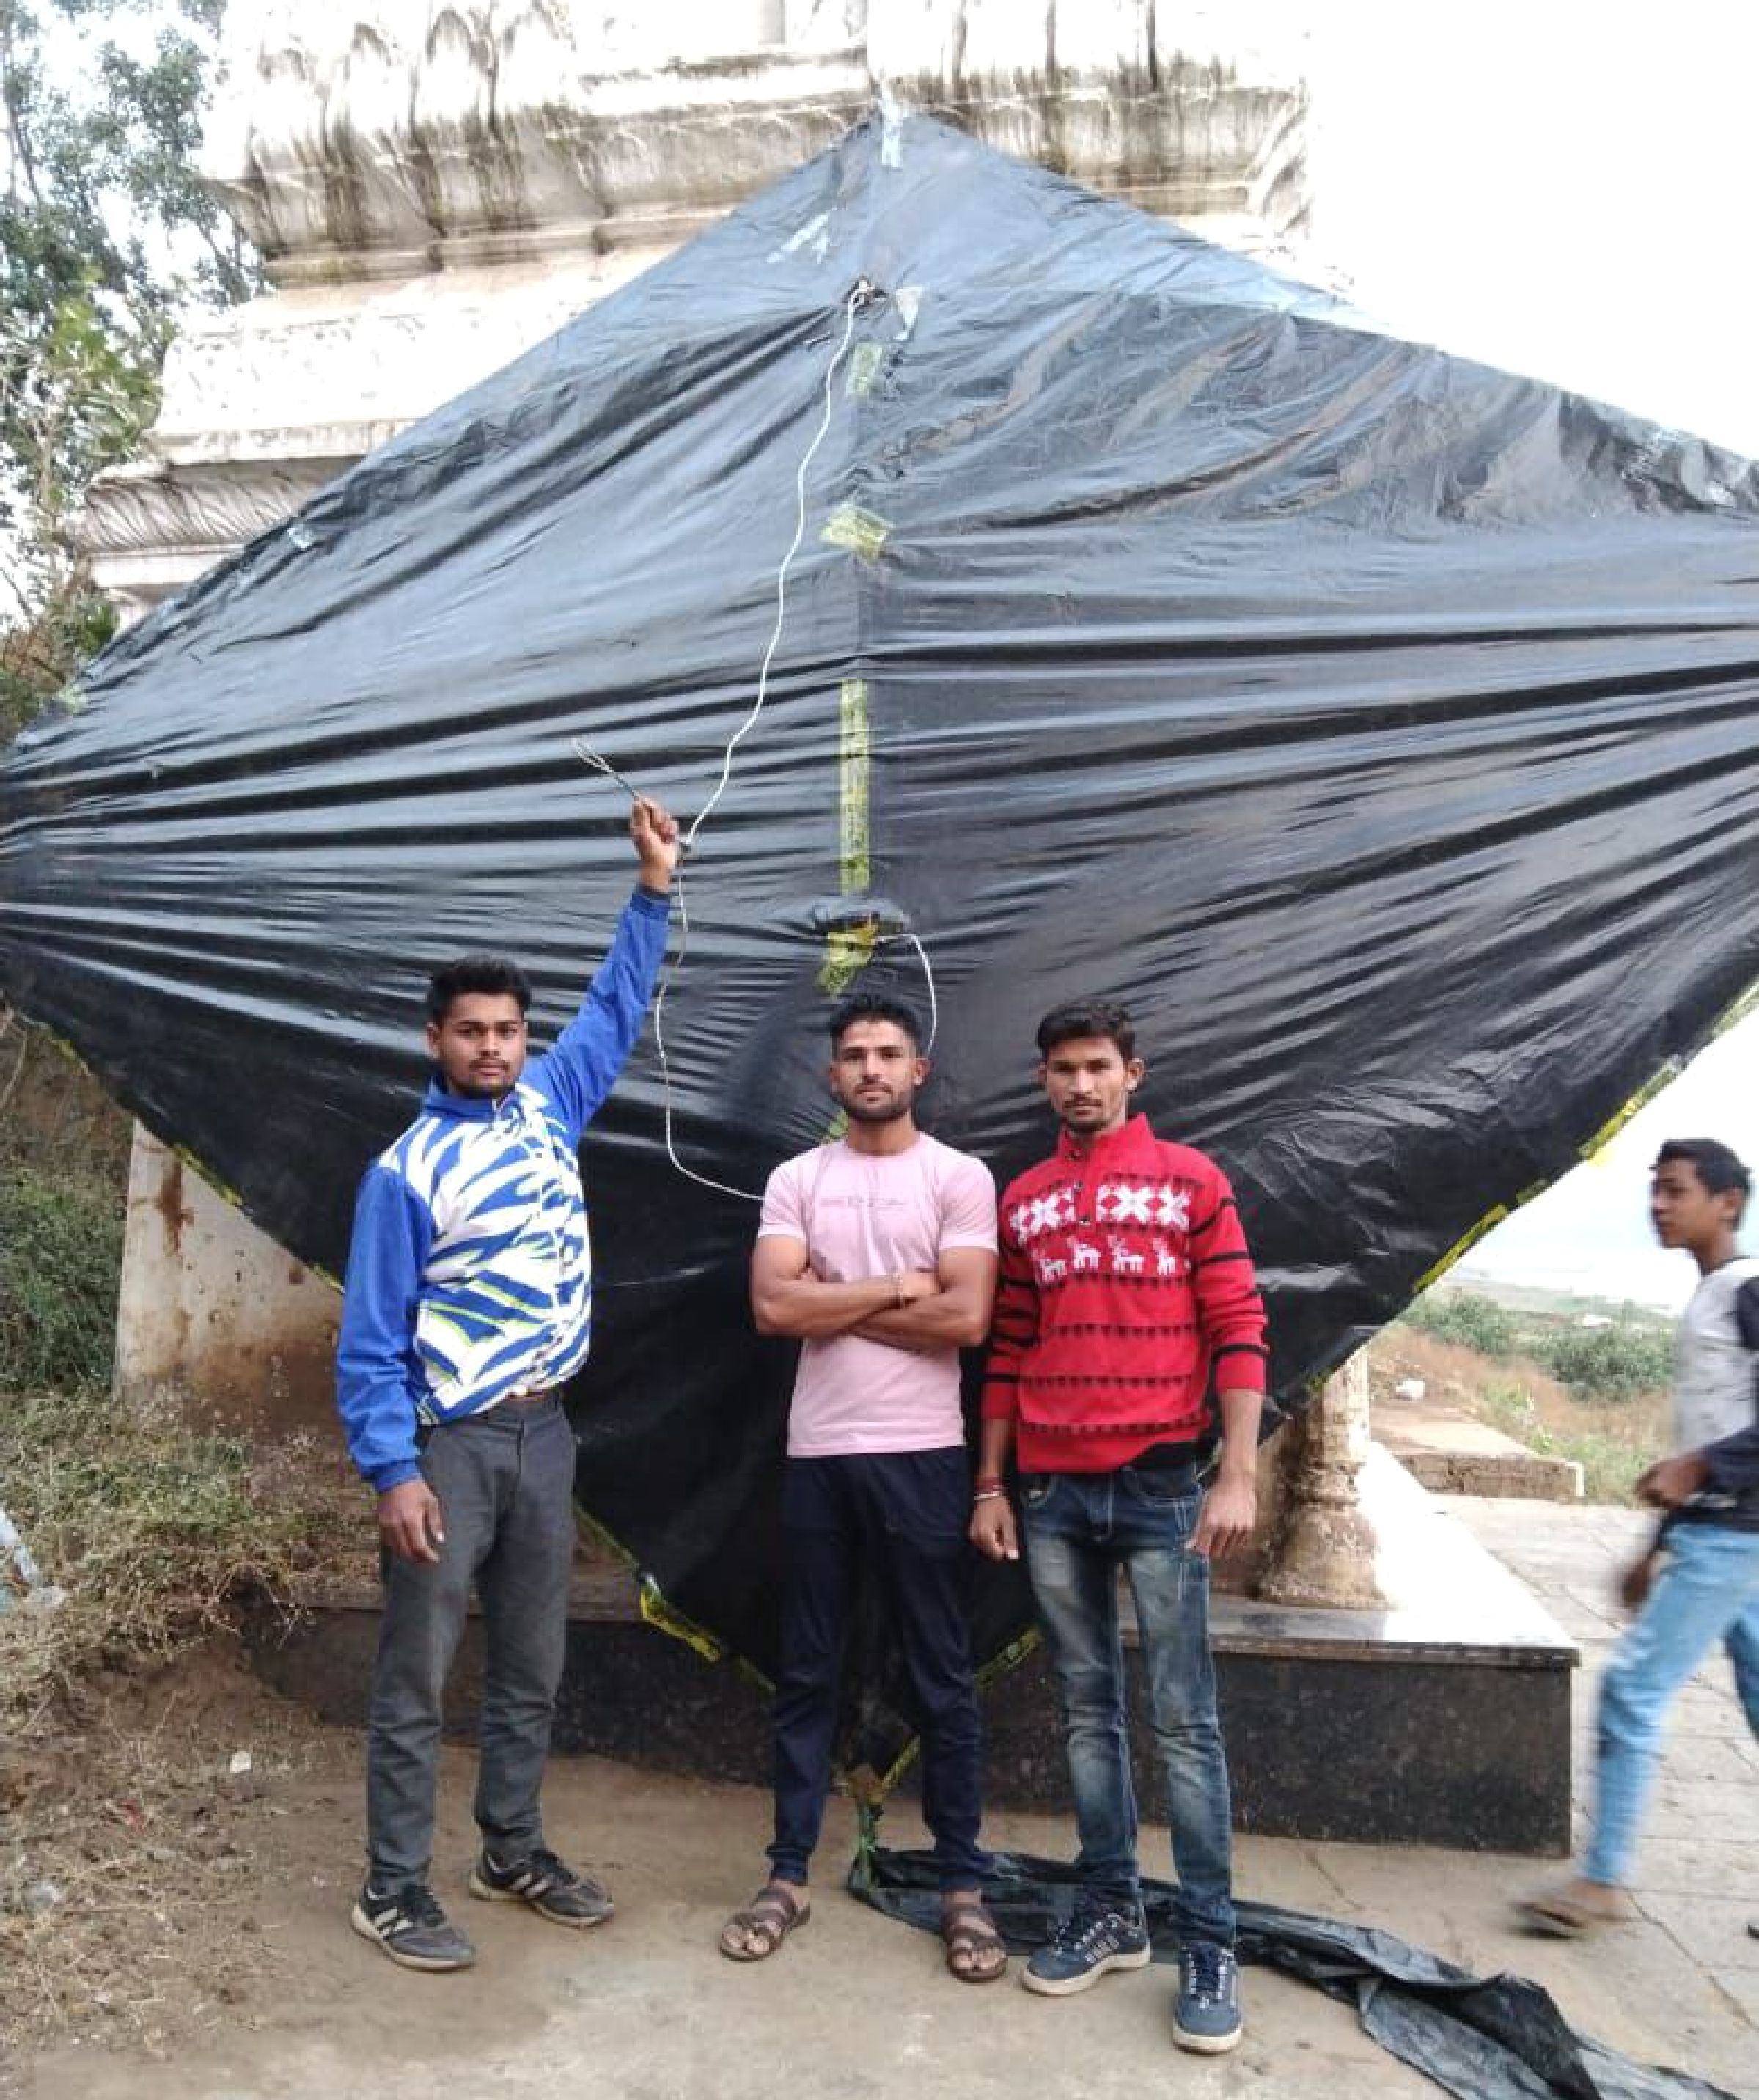 Video: Burhanpur youth made 12 feet kite, flew it with cot rope